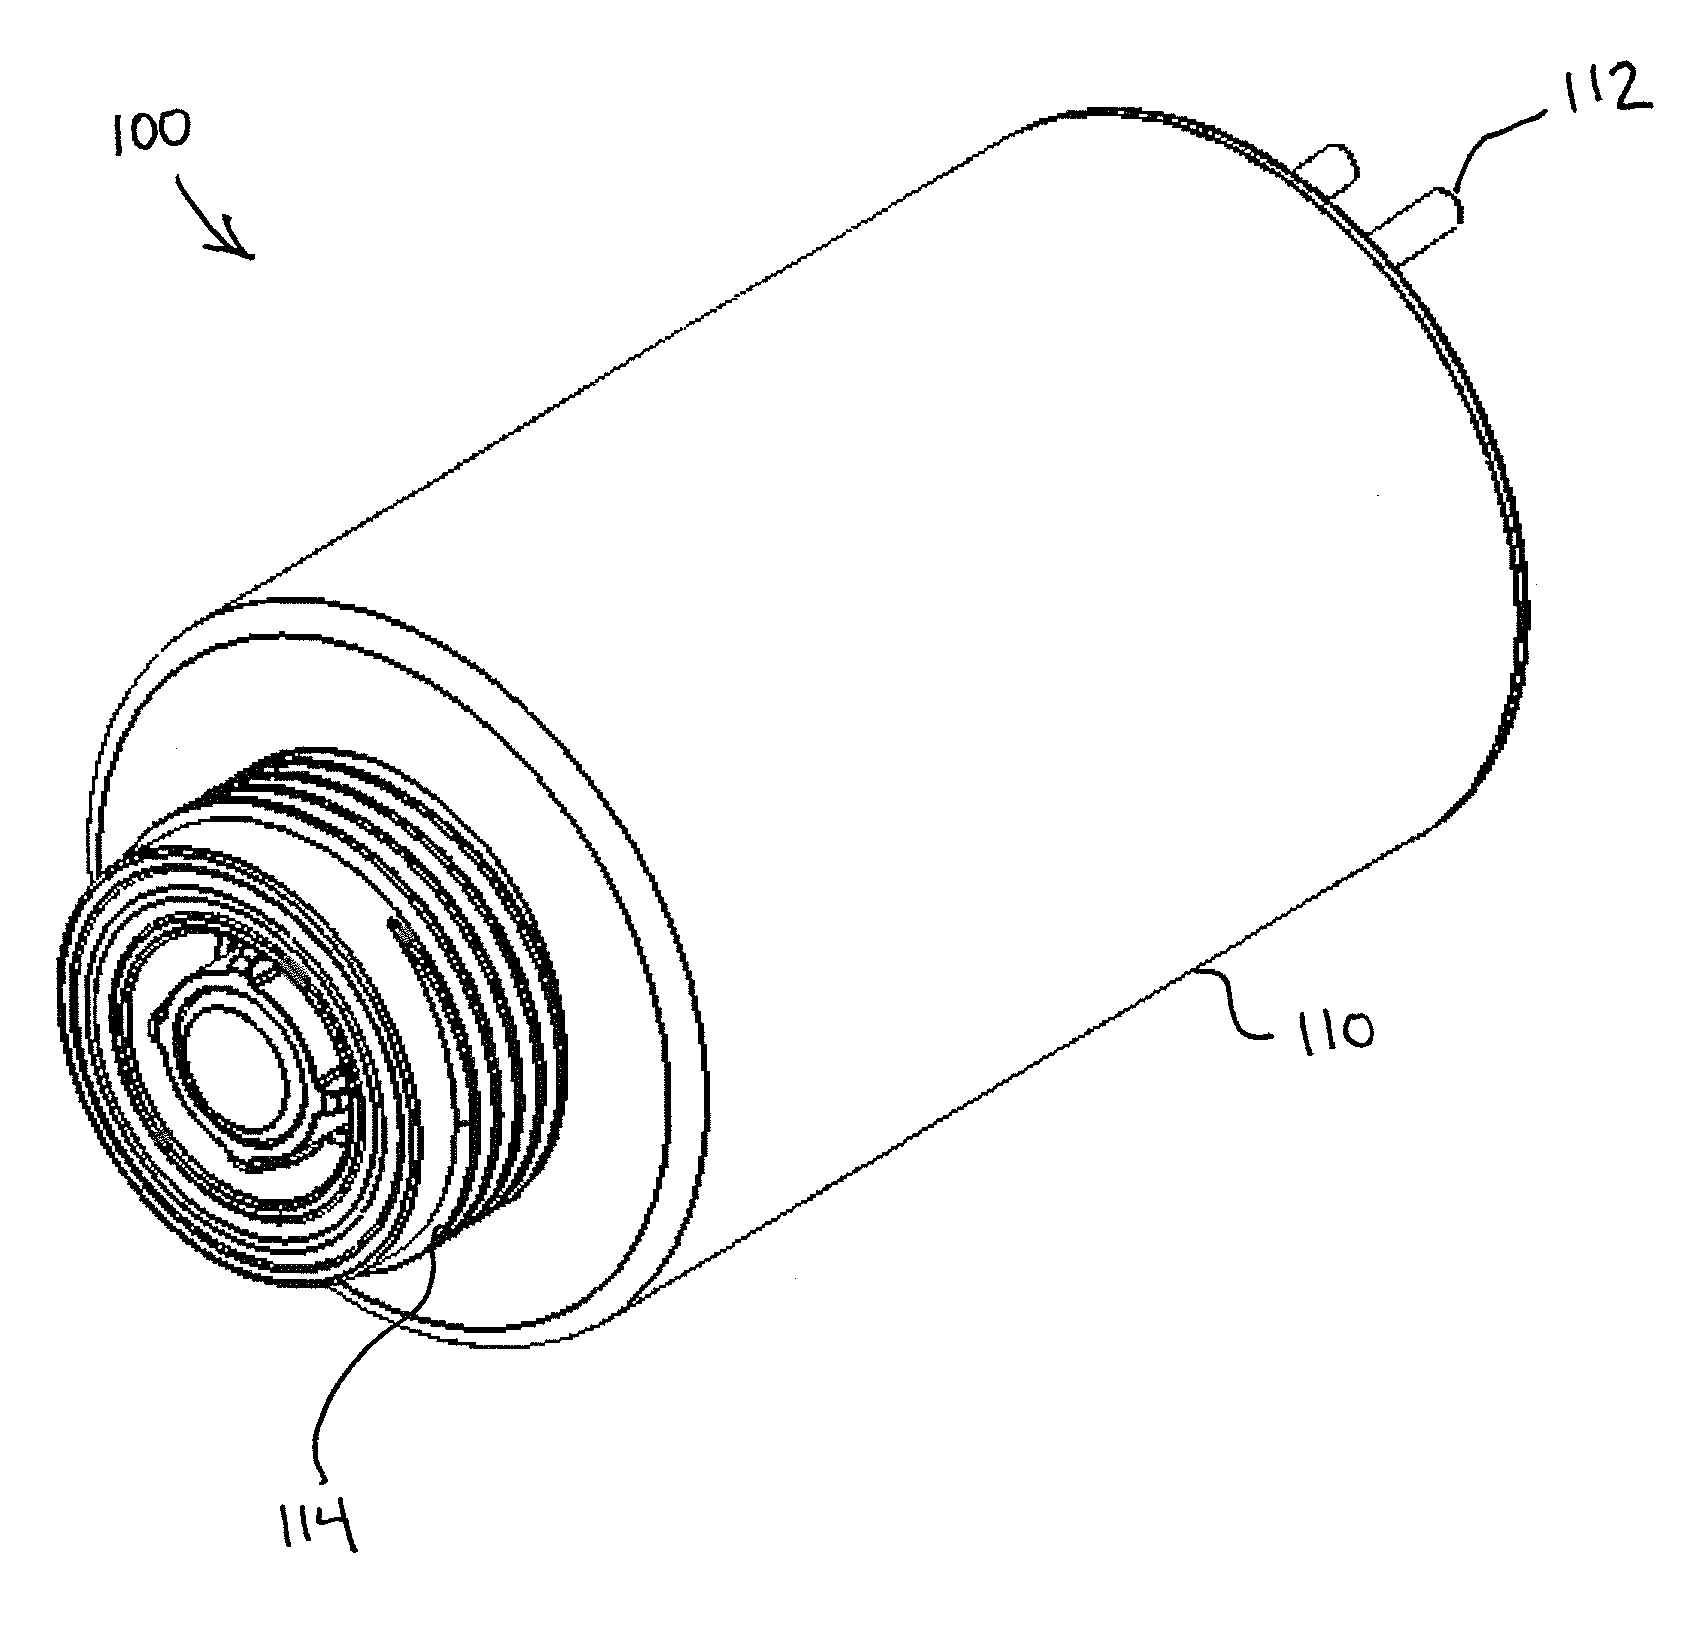 Power-efficient actuator assemblies and methods of manufacture